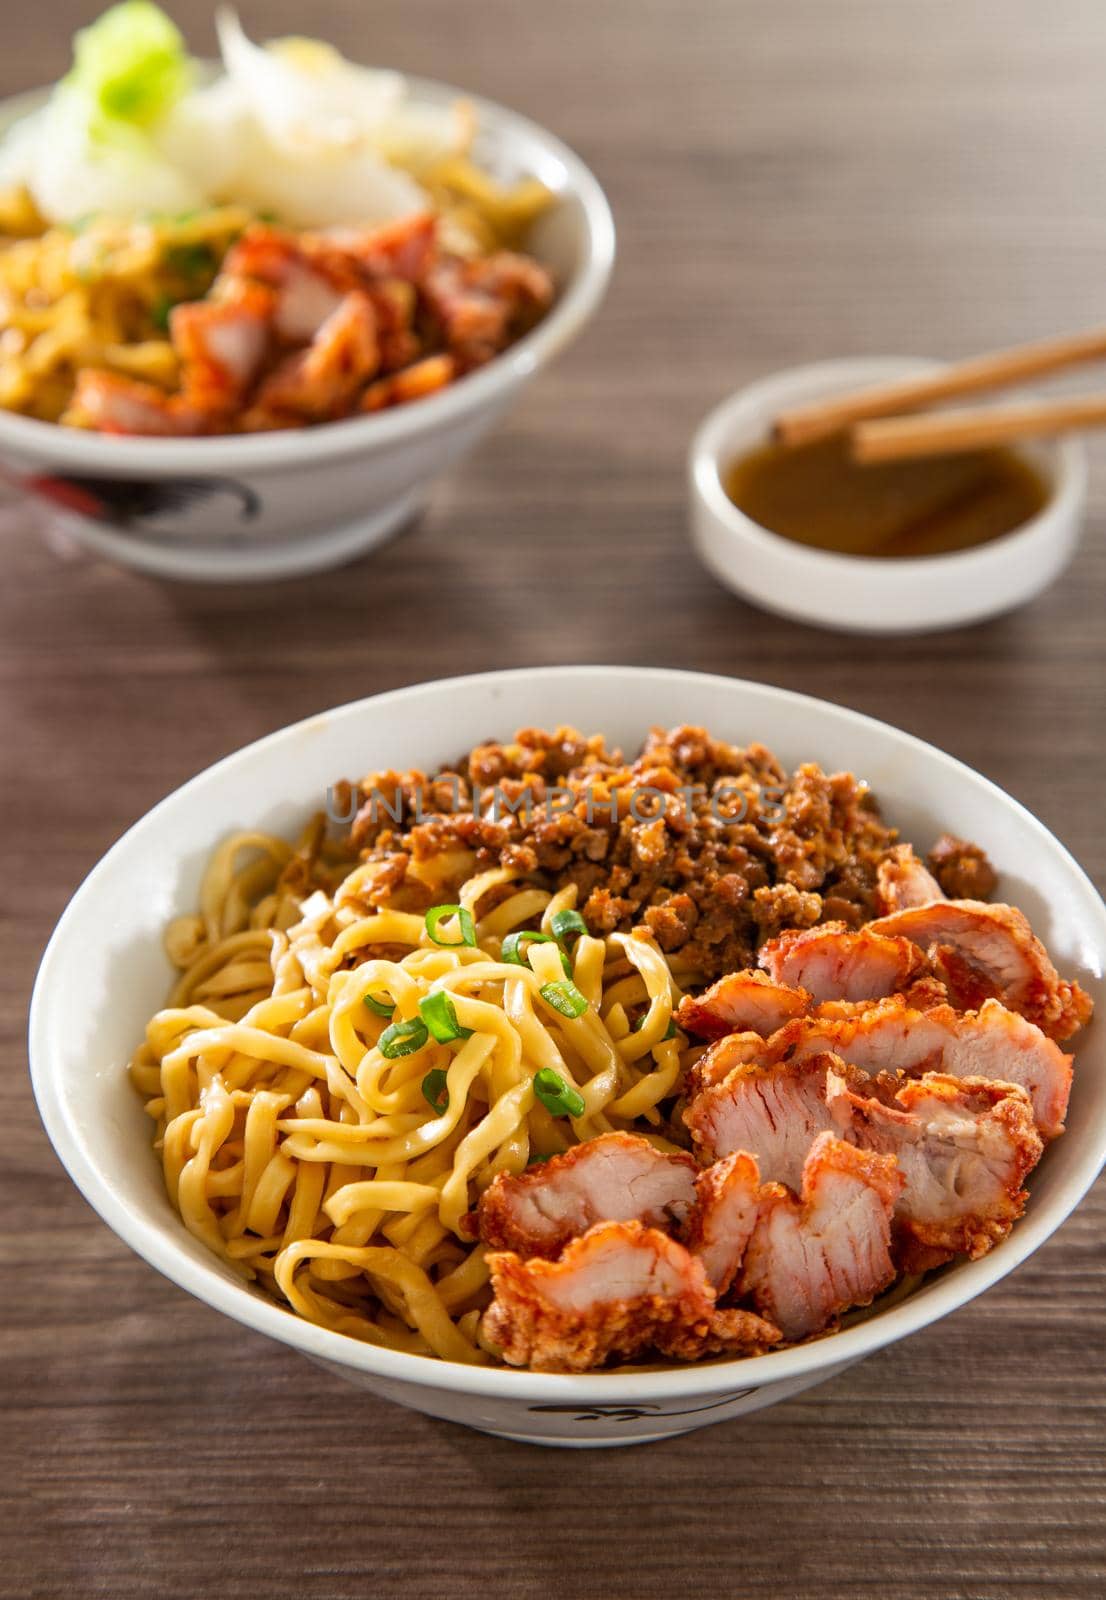 Kolo Mee is a Sarawak Malaysian dish of dry noodles tossed in a savoury pork and shallot mixture, topped off with fragrant fried onions. by tehcheesiong